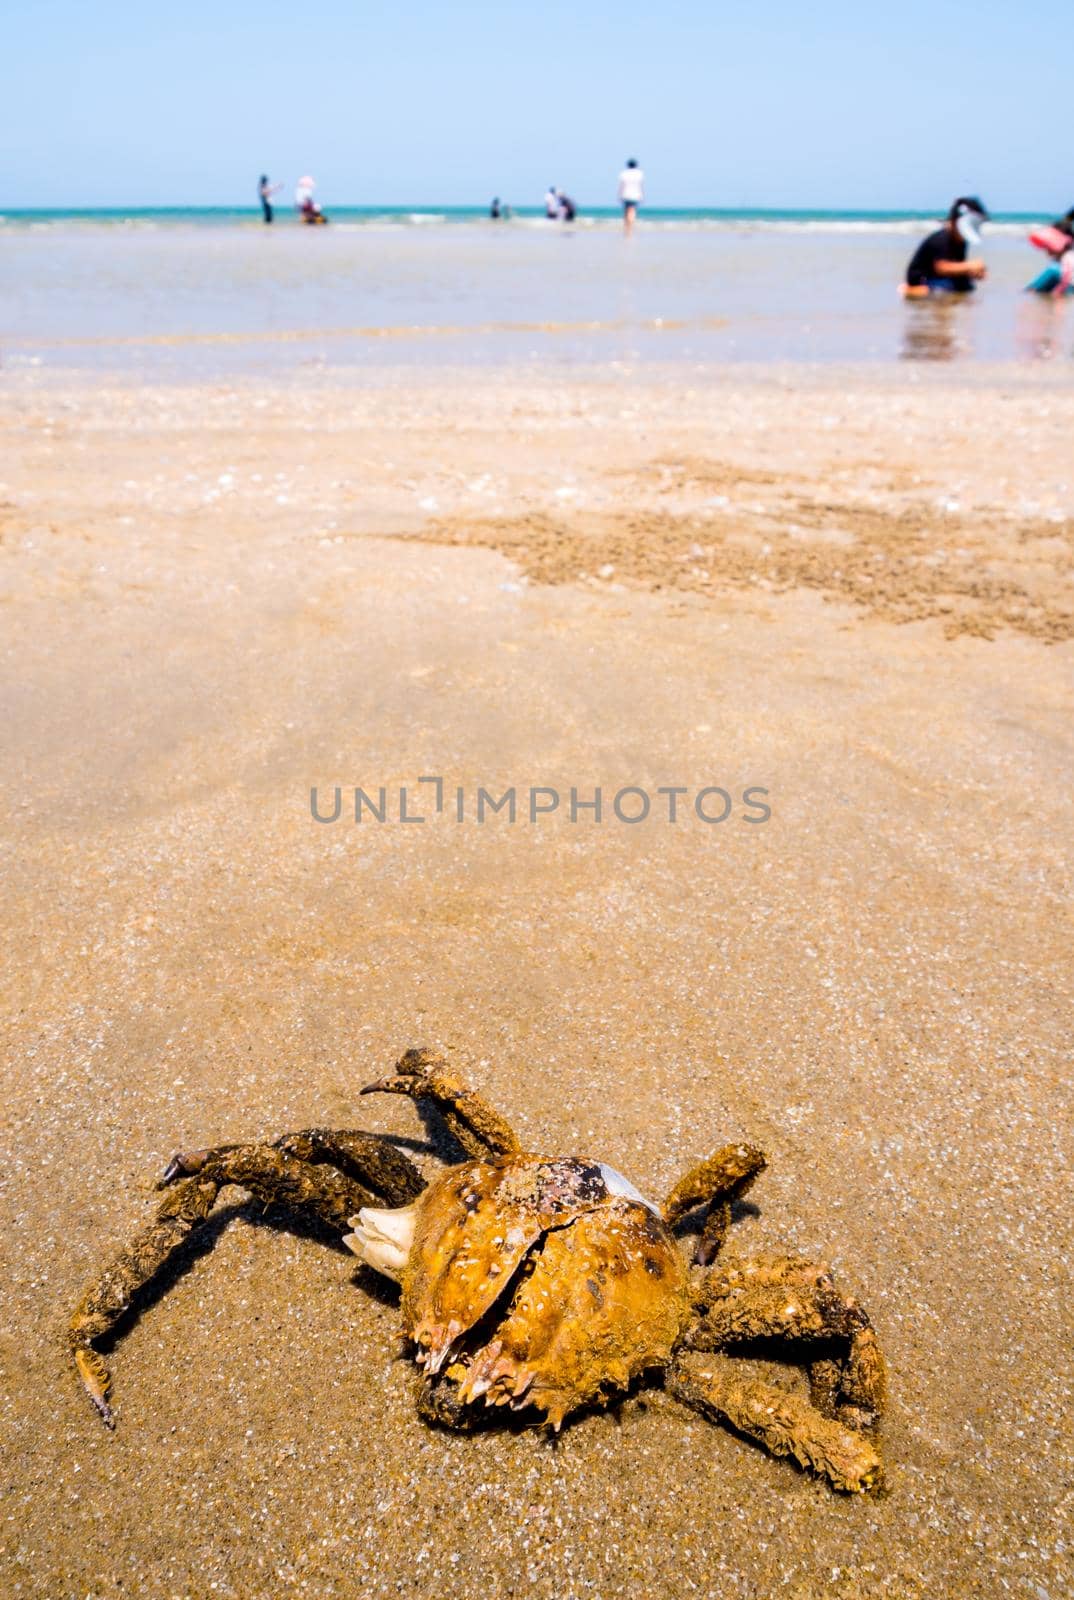 The dried carapace of dead Spanner Crab on sand where many people are play water on the beach